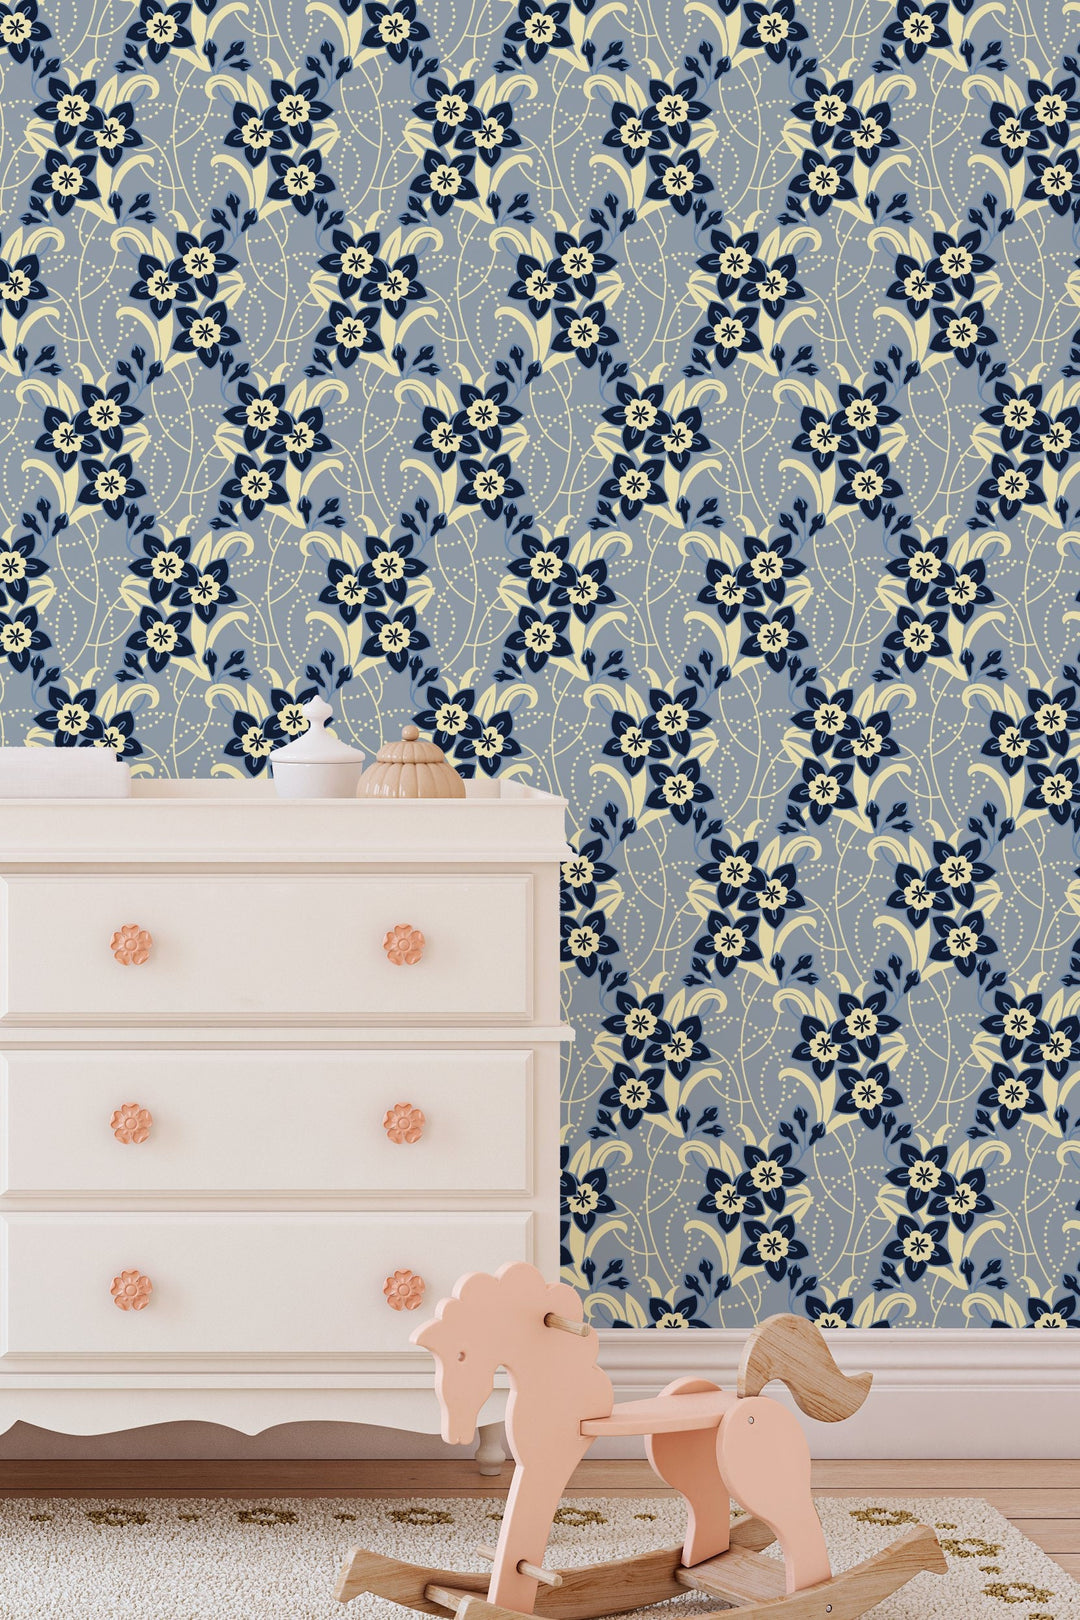 Sunday flowers blue wallpaper design#3019 - Peel and stick wallpaper, Removable , traditional traditional wallpaper